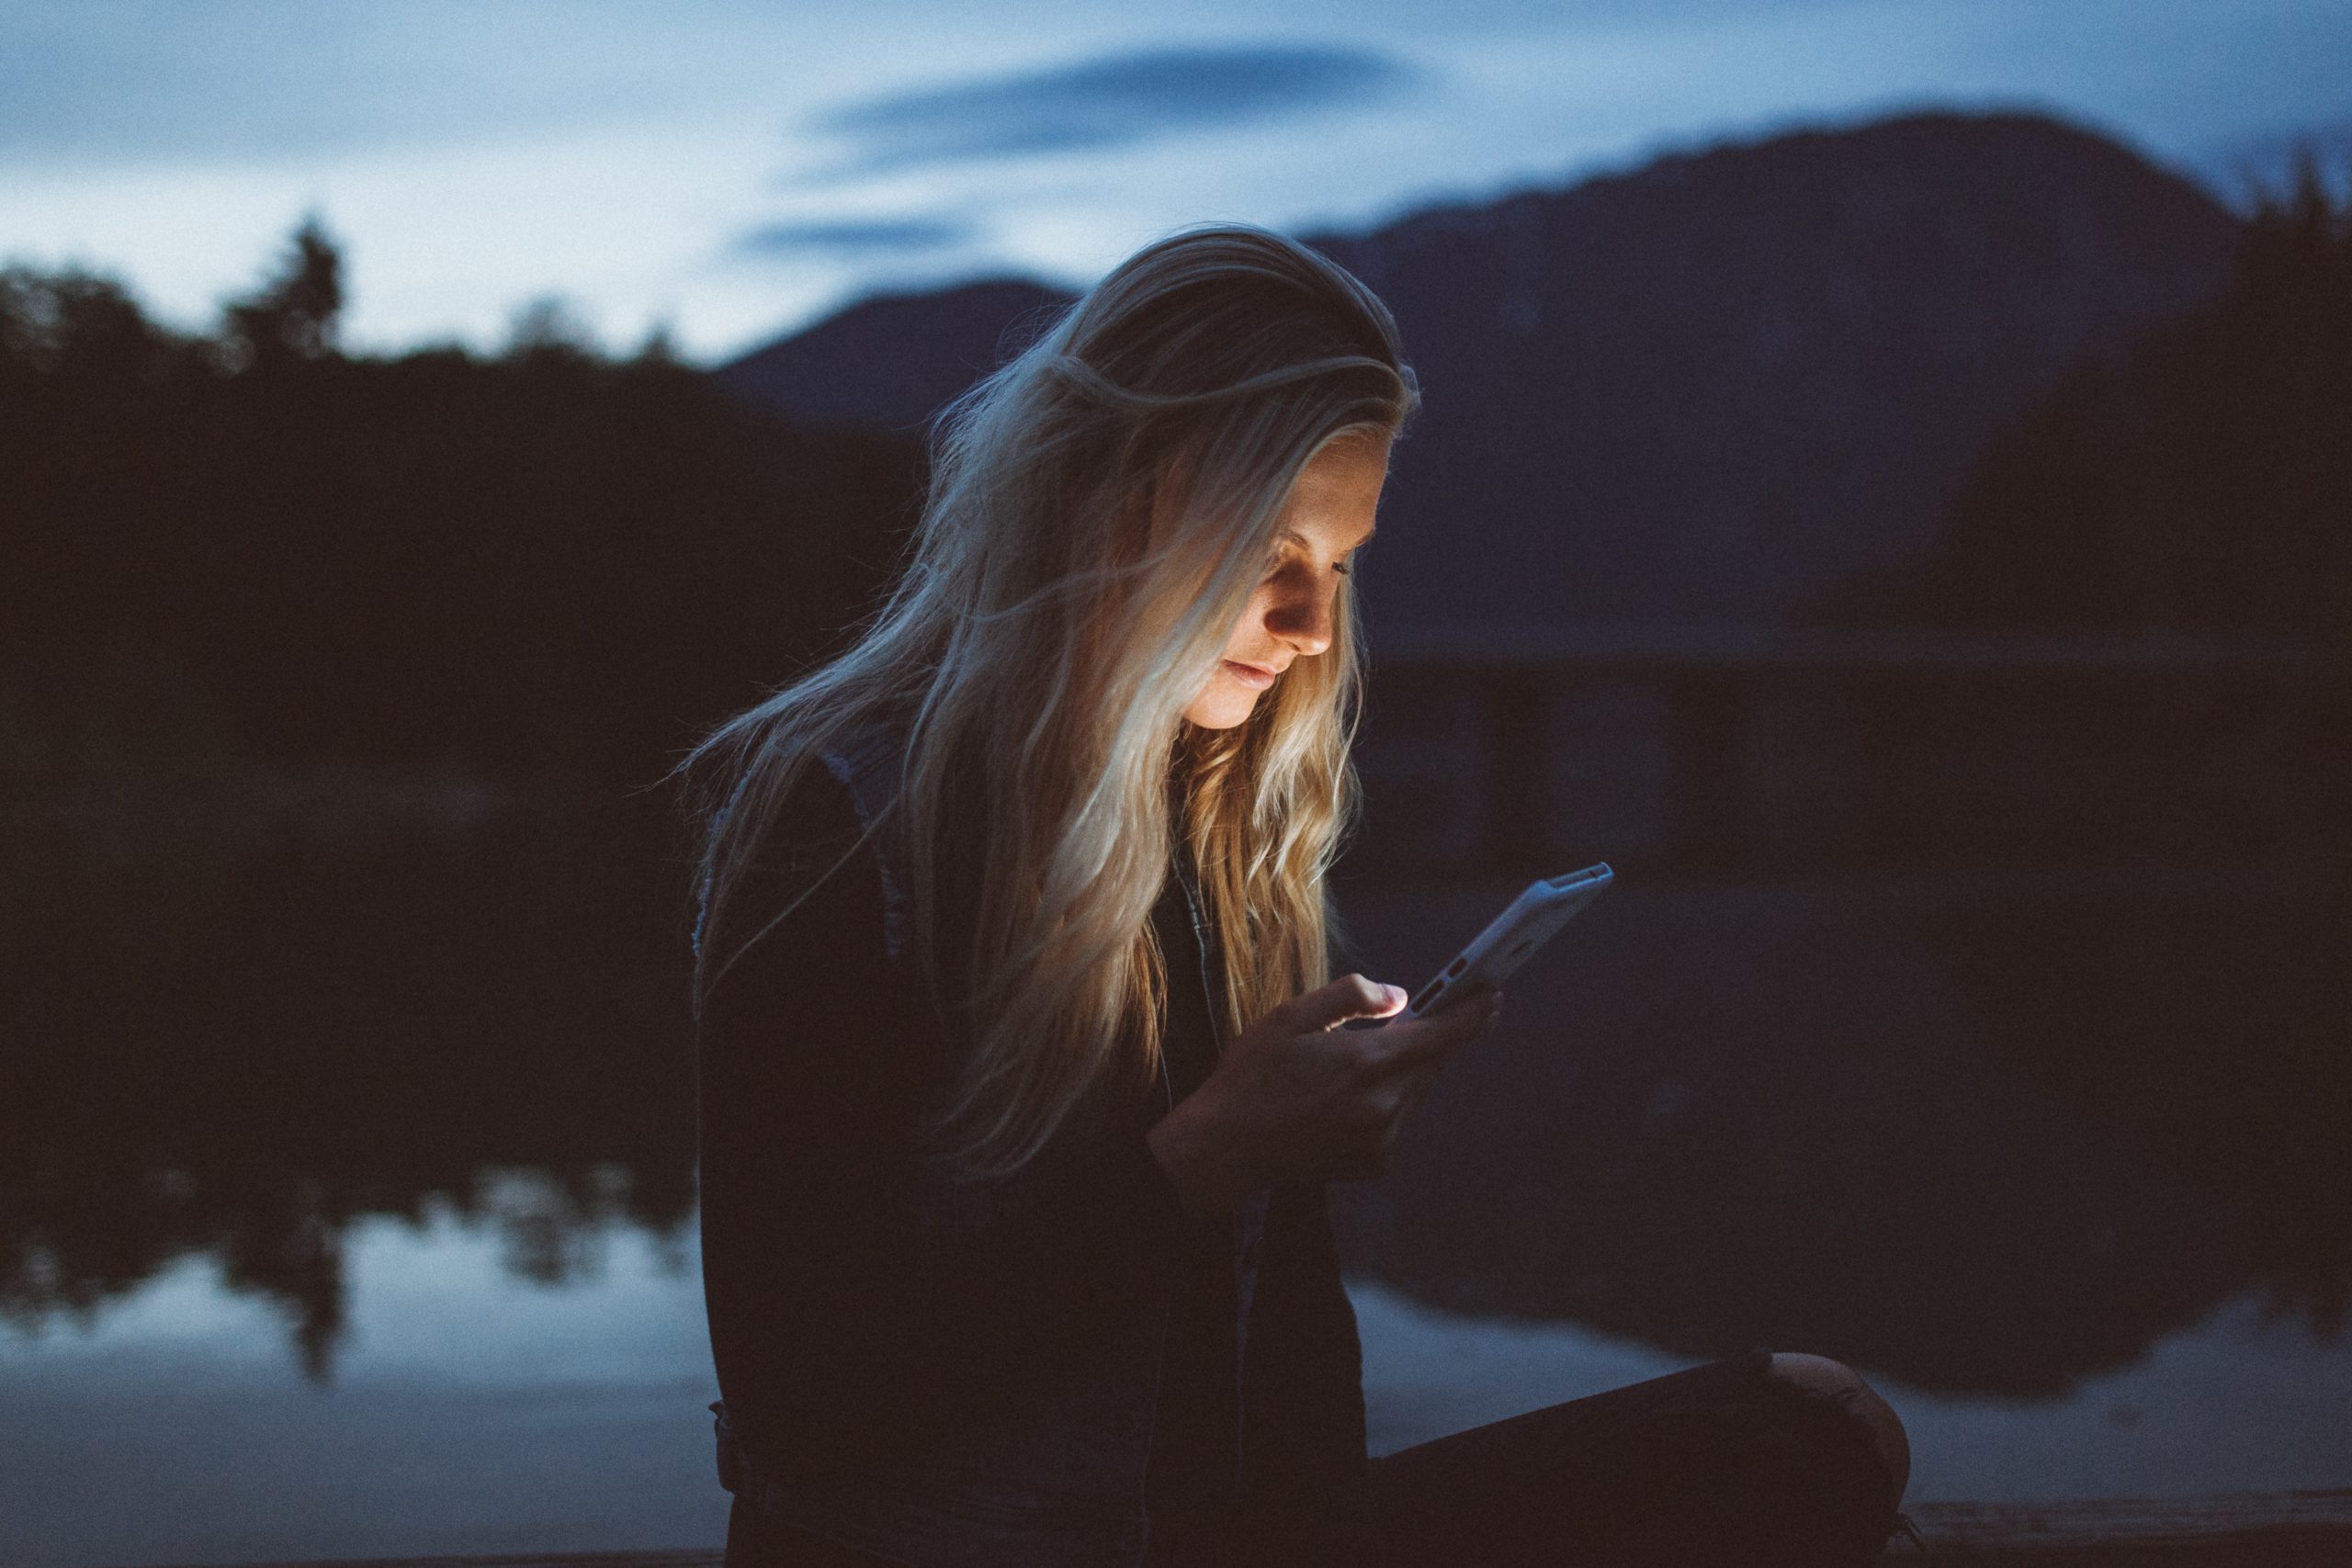 Photo of a woman at night reading her phone